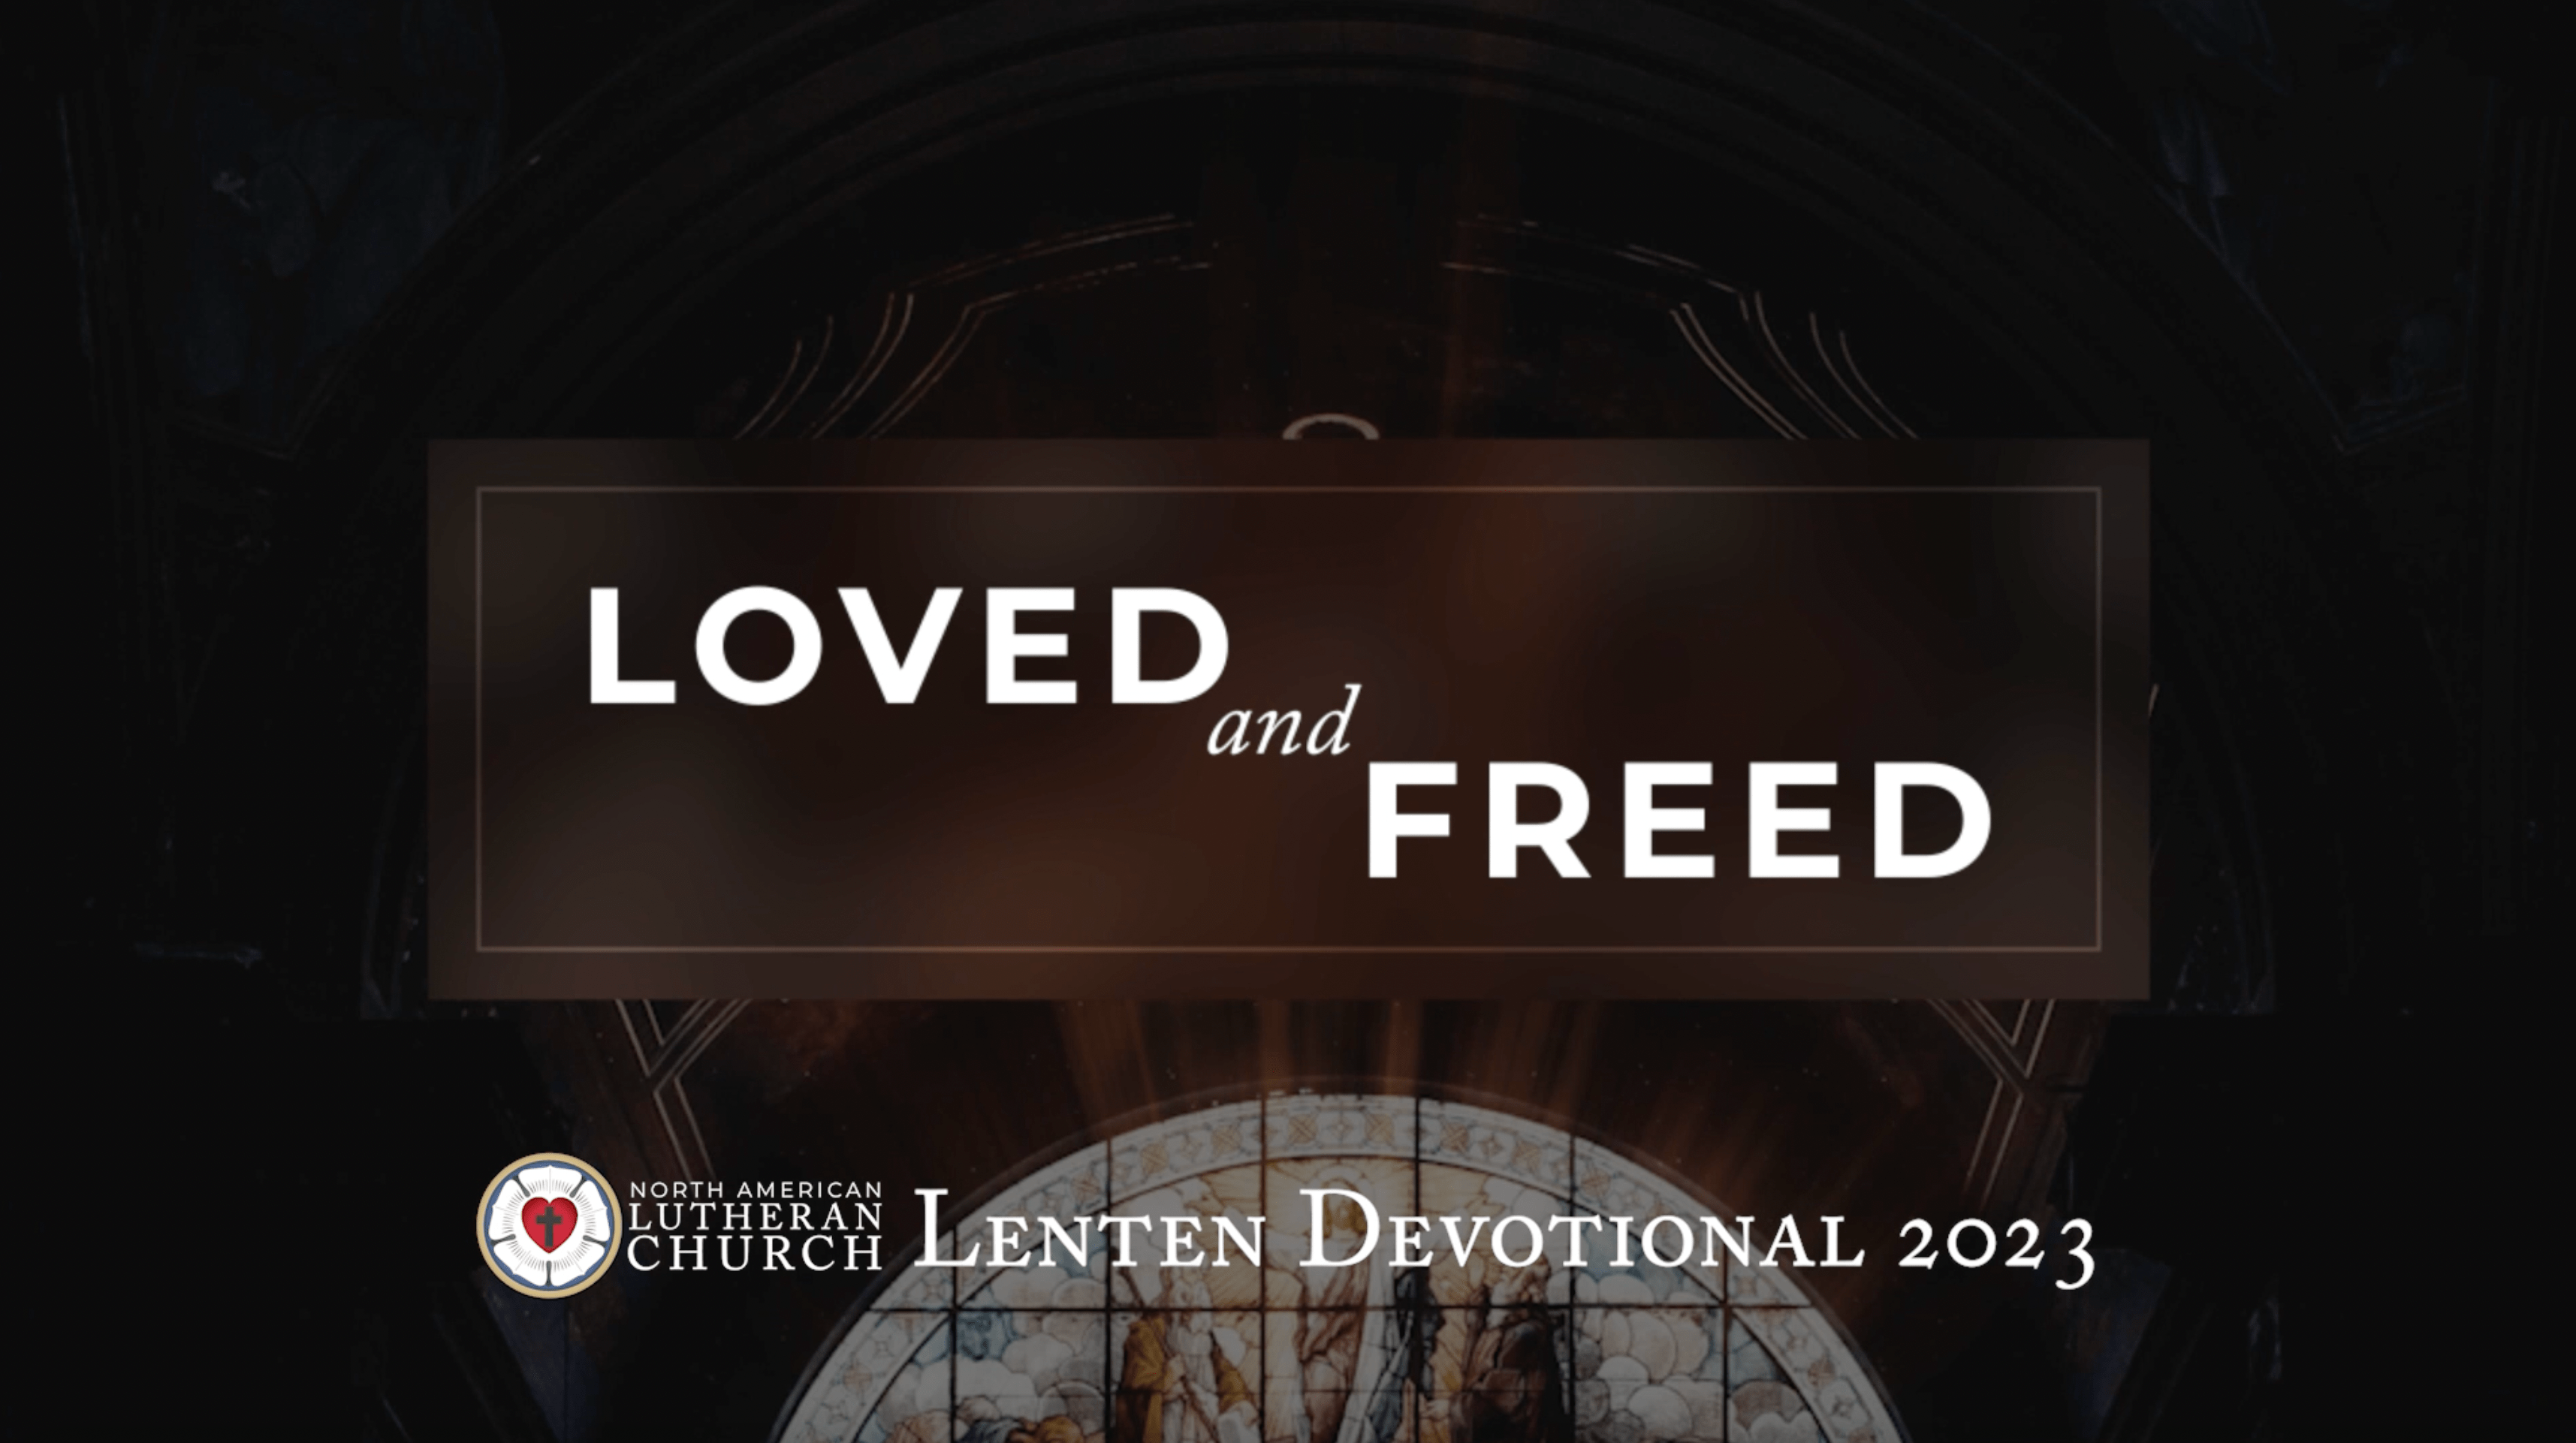 February 26, 2023 | First Sunday in Lent